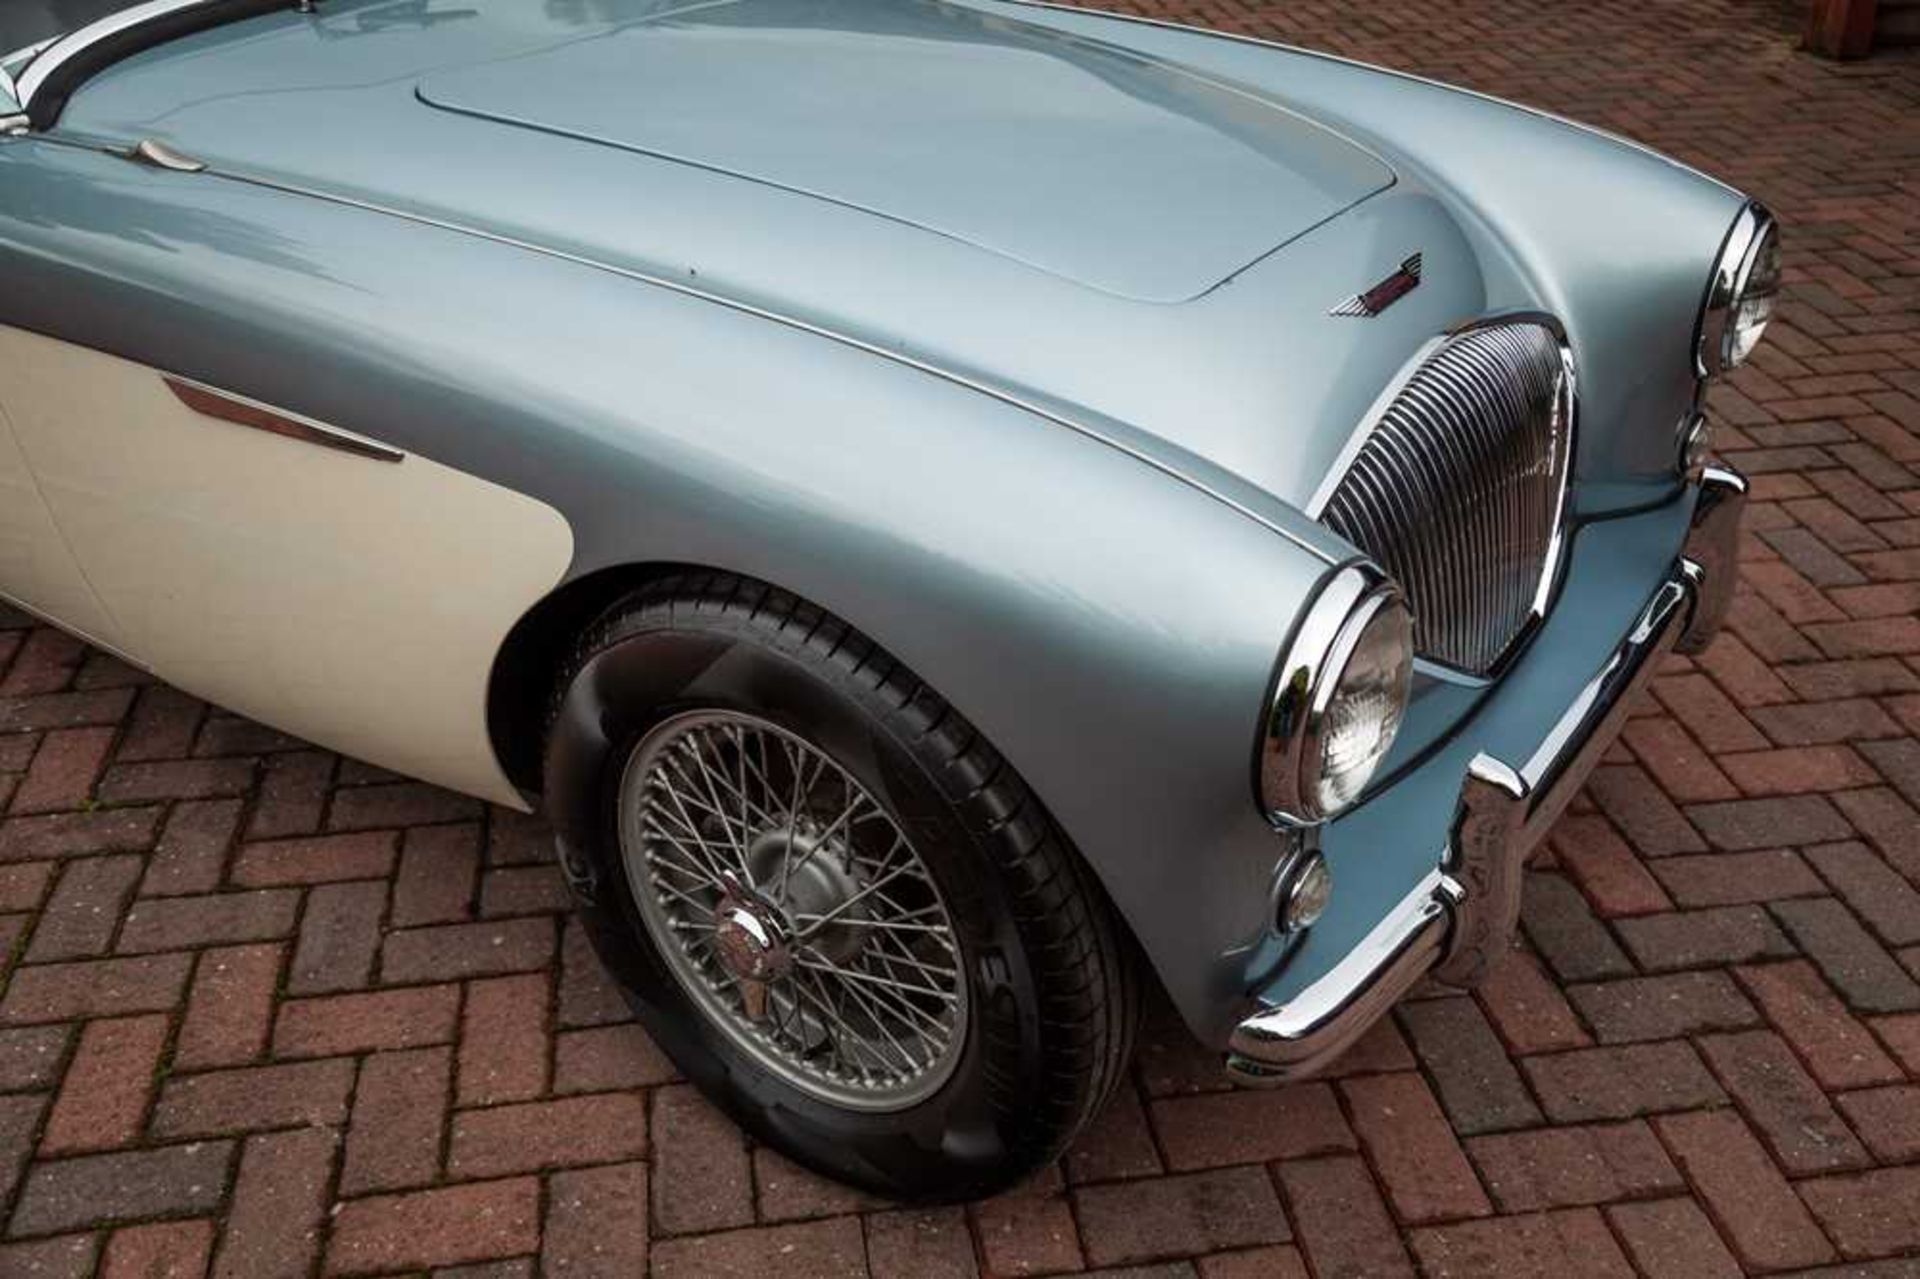 1955 Austin-Healey 100/4 Subtly Upgraded with 5-Speed Transmission and Front Disc Brakes - Image 21 of 54